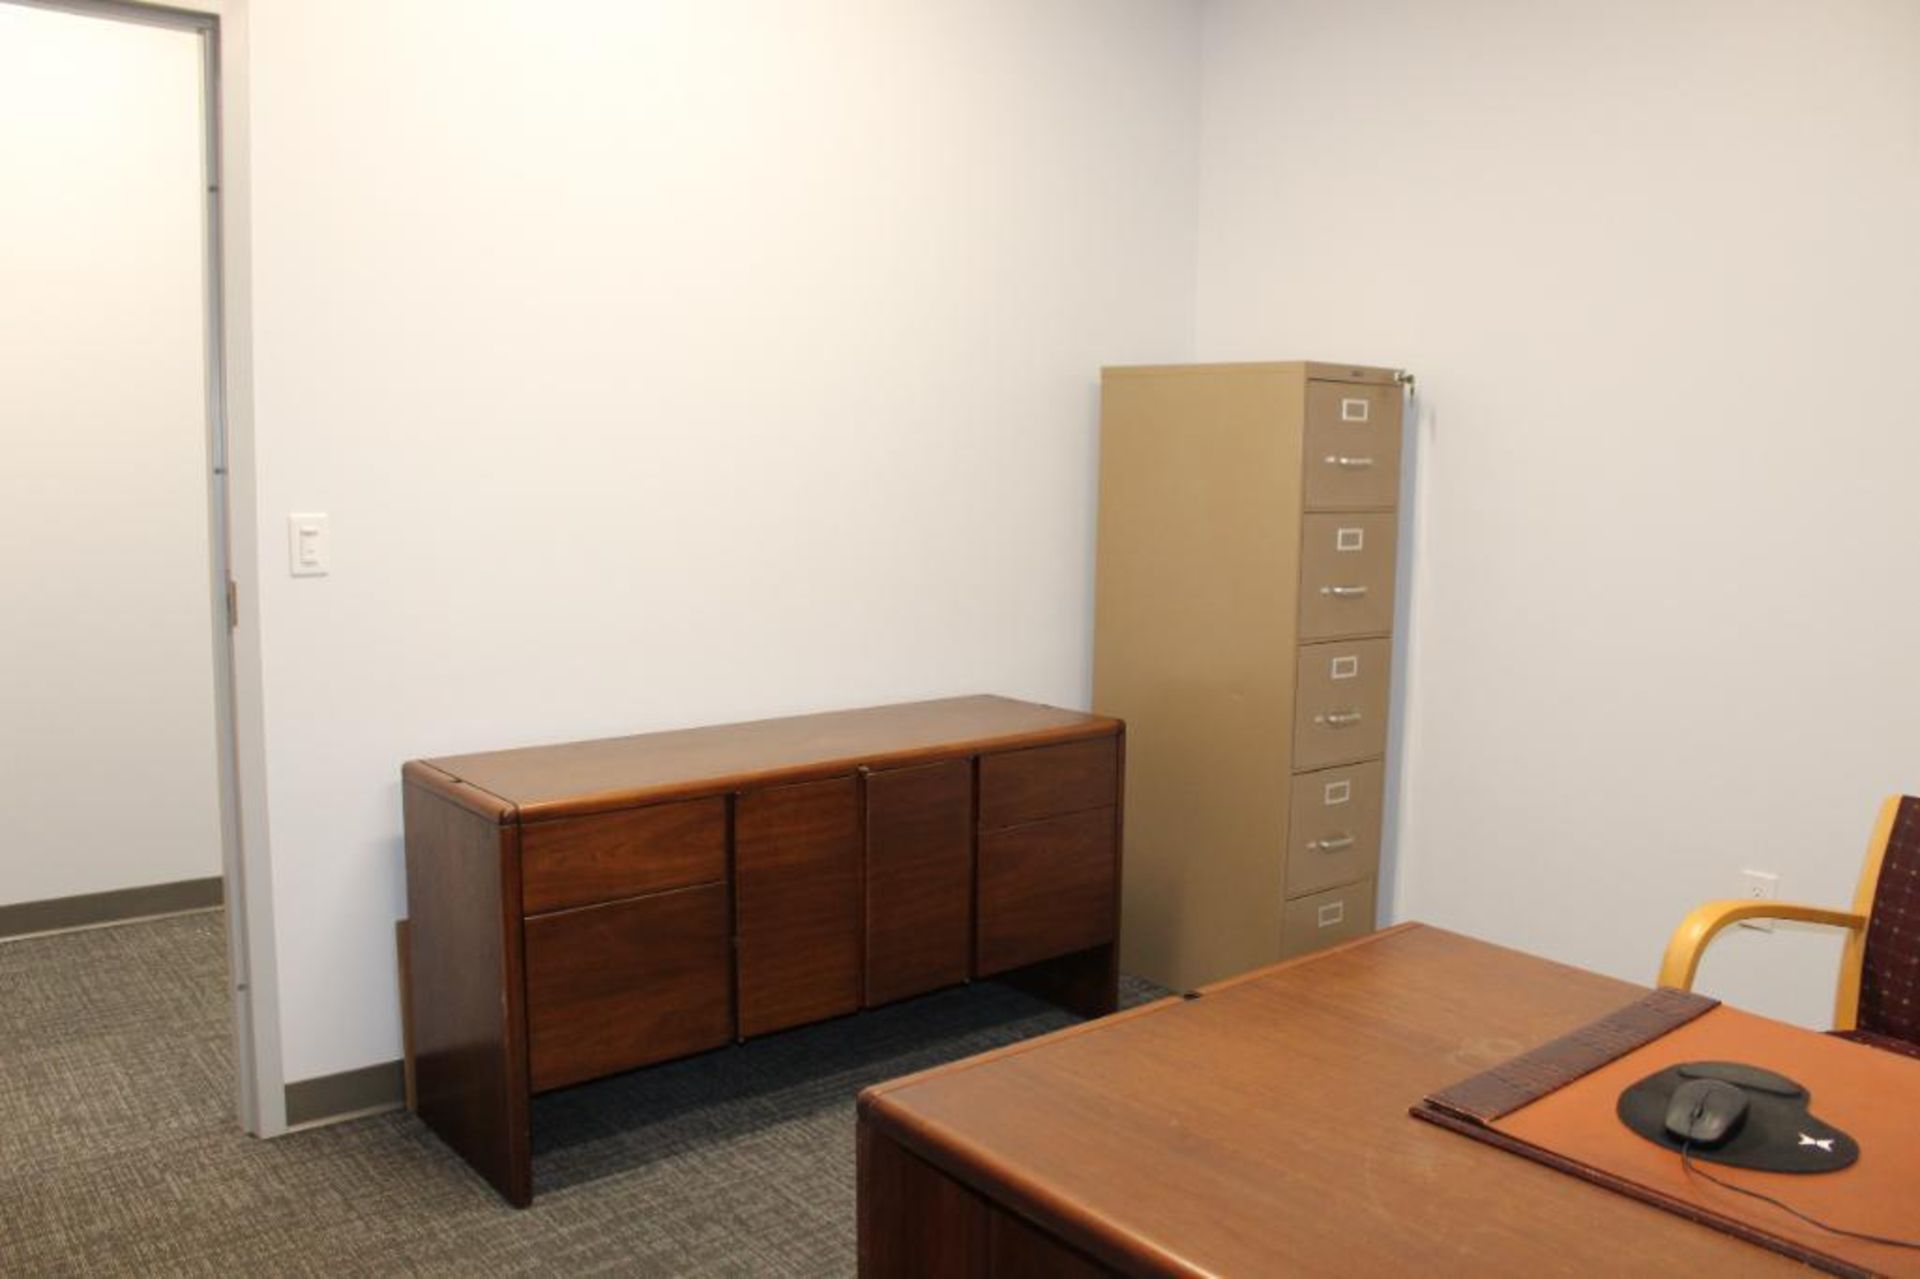 Contents of Office - FURNITURE ONLY - Wood Desk, 2 Chairs, Credenza, 5 Drawer Metal Vertical Filing - Image 2 of 4